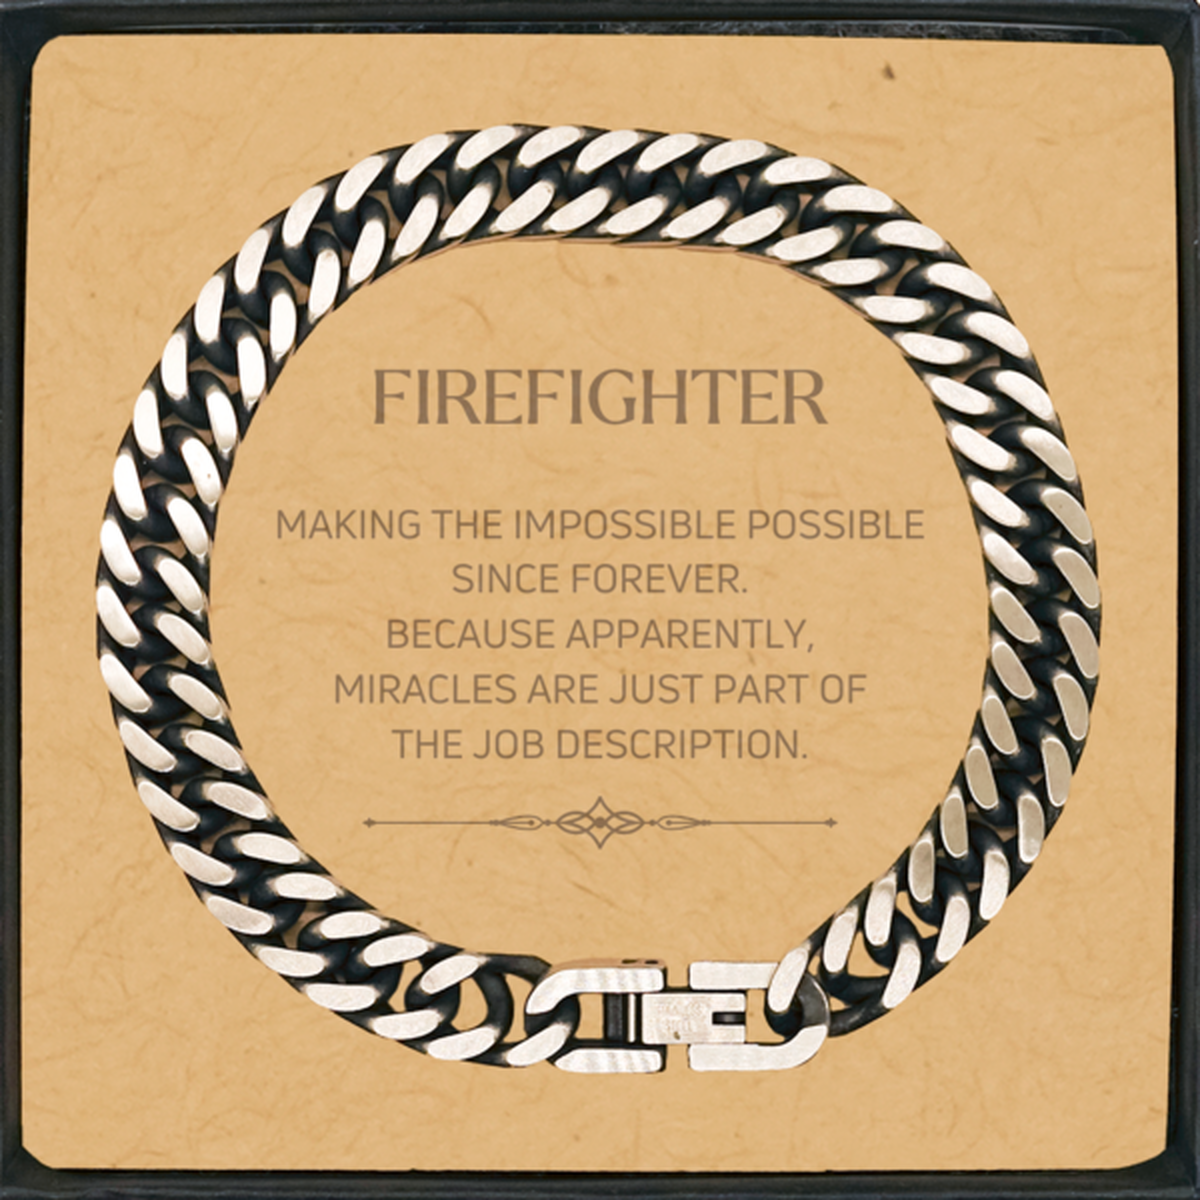 Funny Firefighter Gifts, Miracles are just part of the job description, Inspirational Birthday Cuban Link Chain Bracelet For Firefighter, Men, Women, Coworkers, Friends, Boss